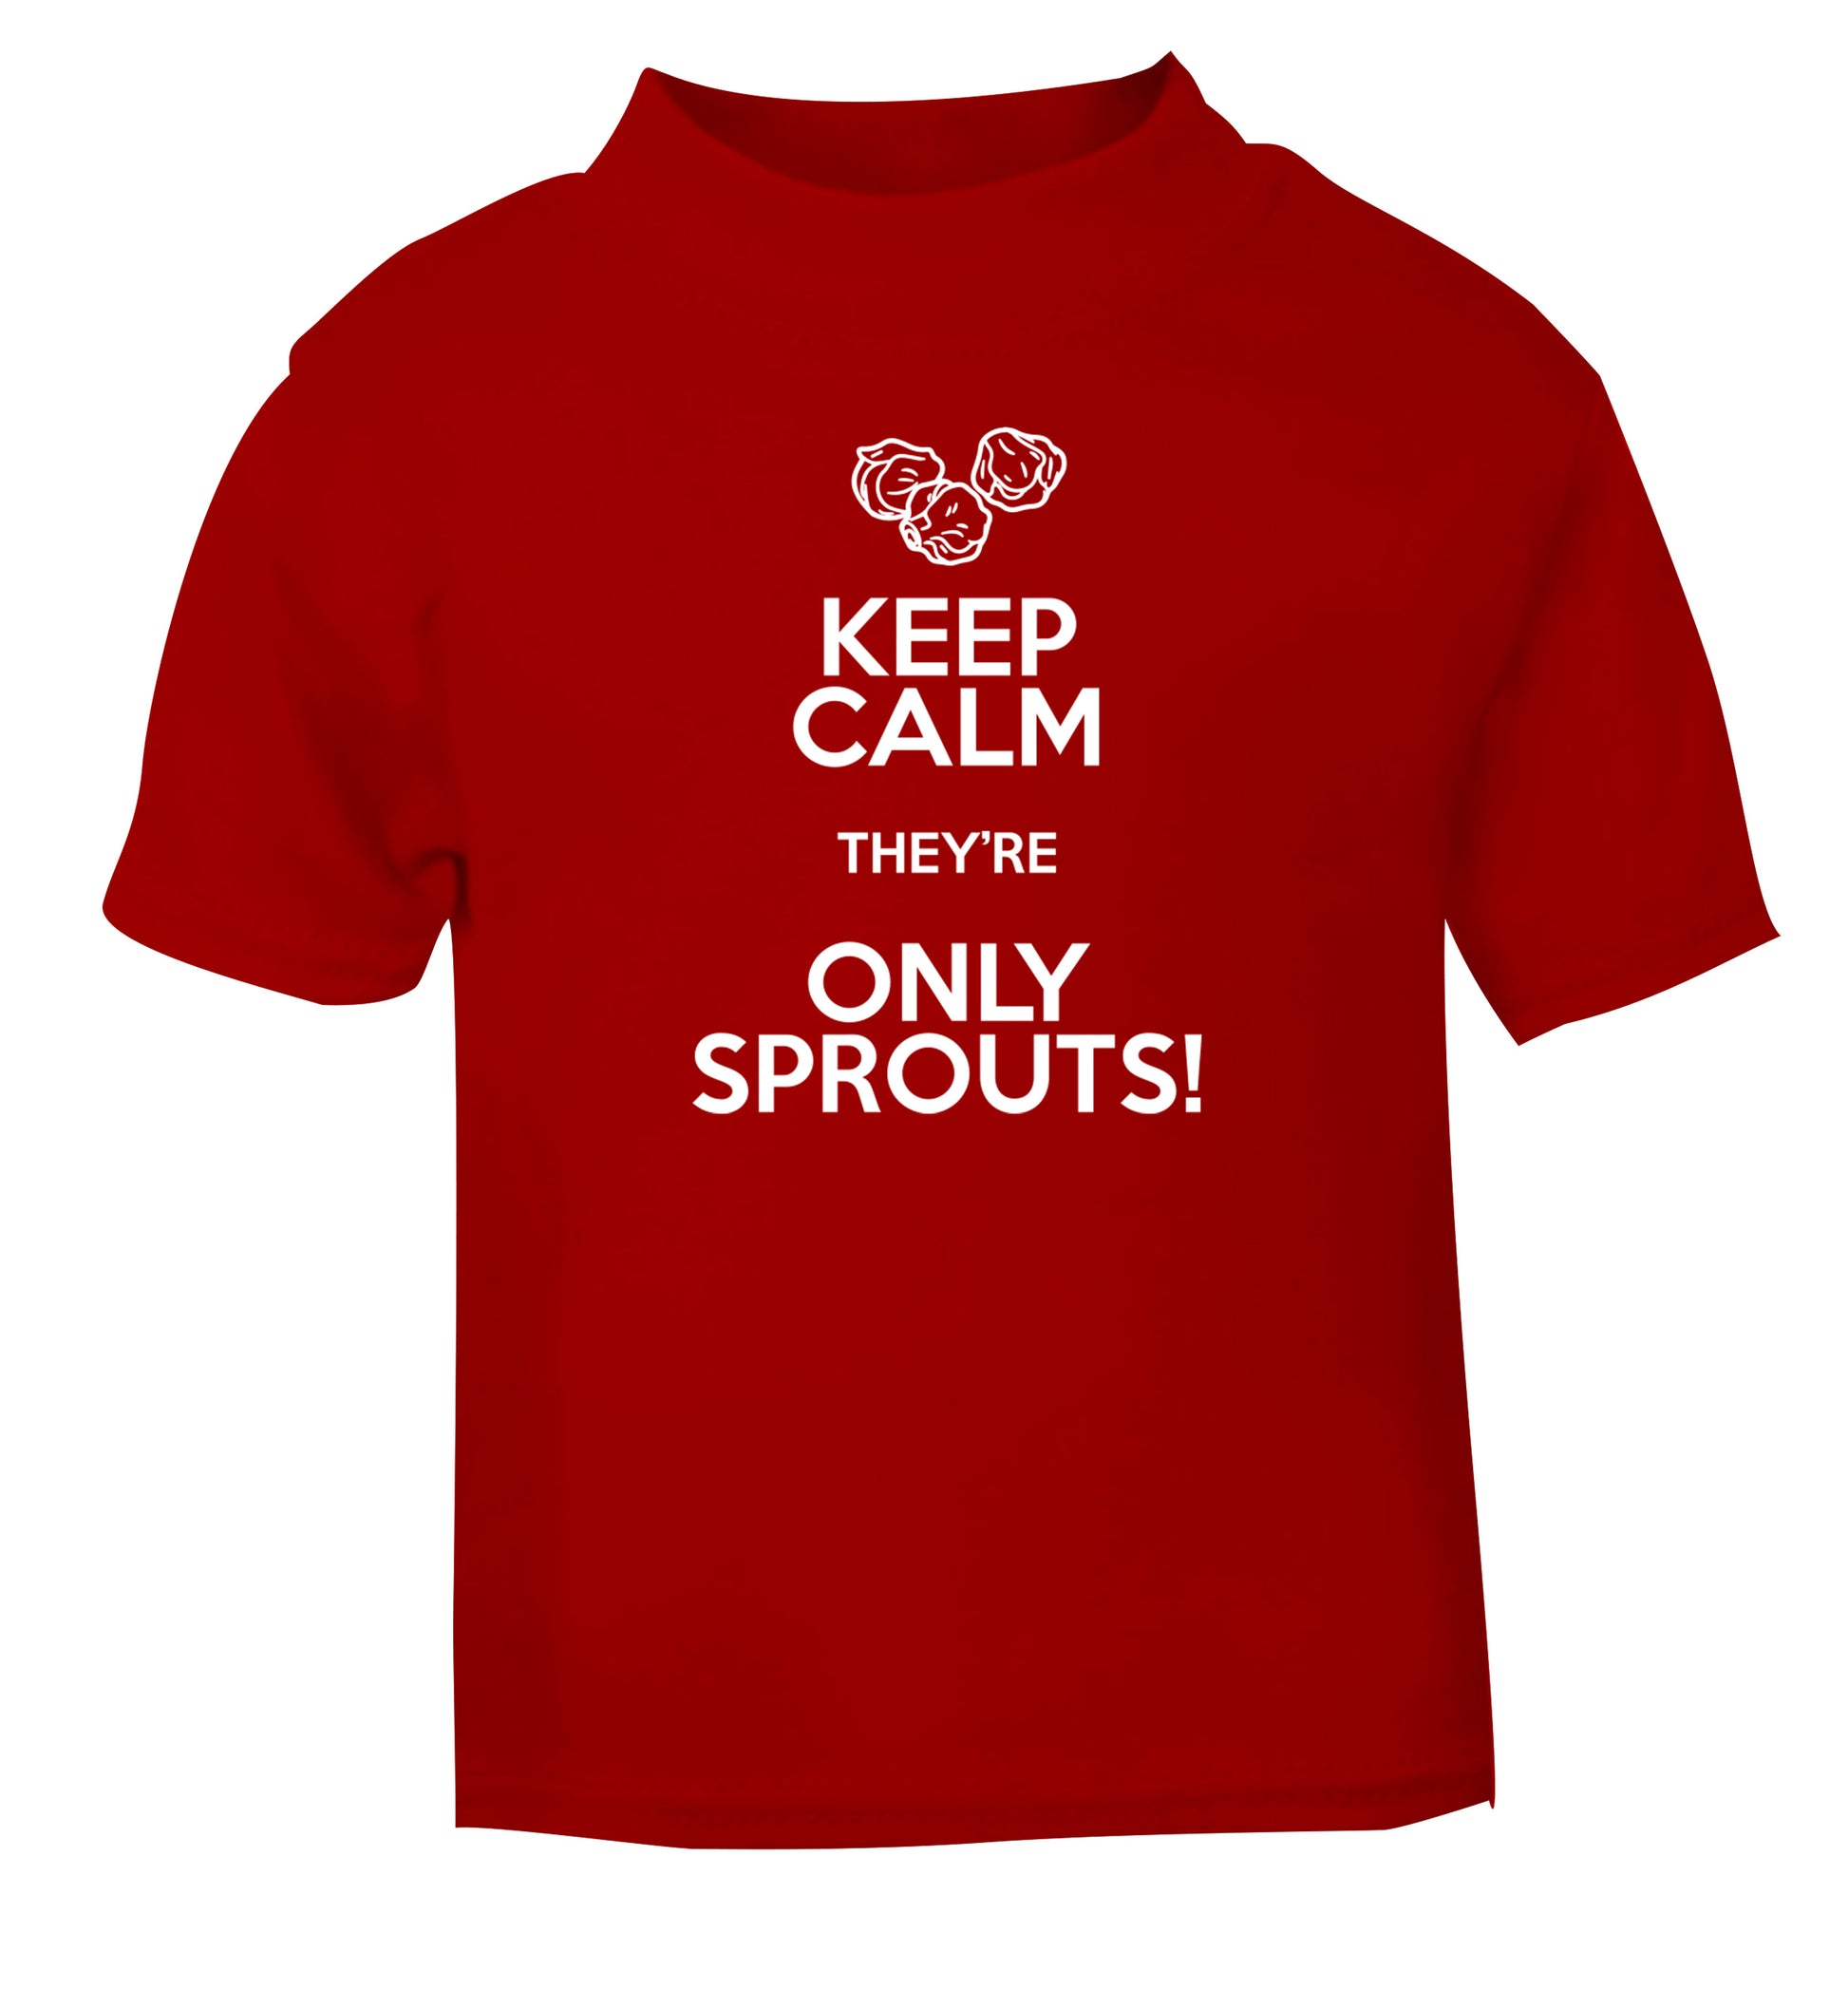 Keep calm they're only sprouts red Baby Toddler Tshirt 2 Years